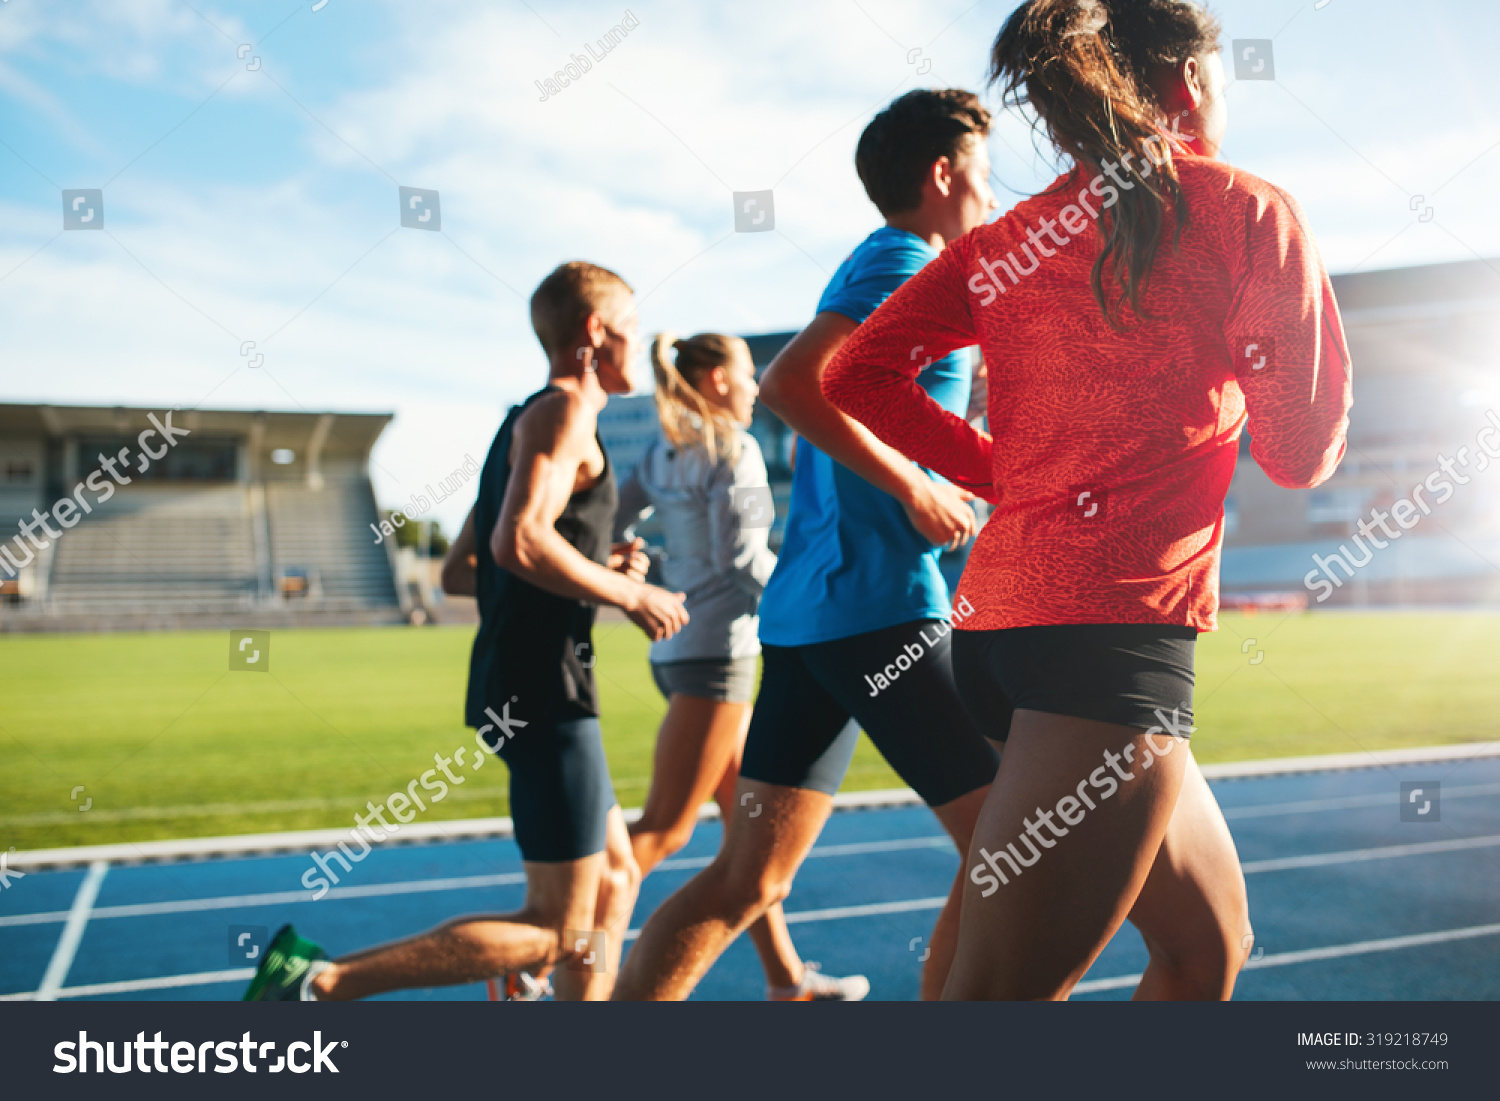 Rear view of young people running together on race track. Young athletes practicing a run on athletics stadium track. #319218749